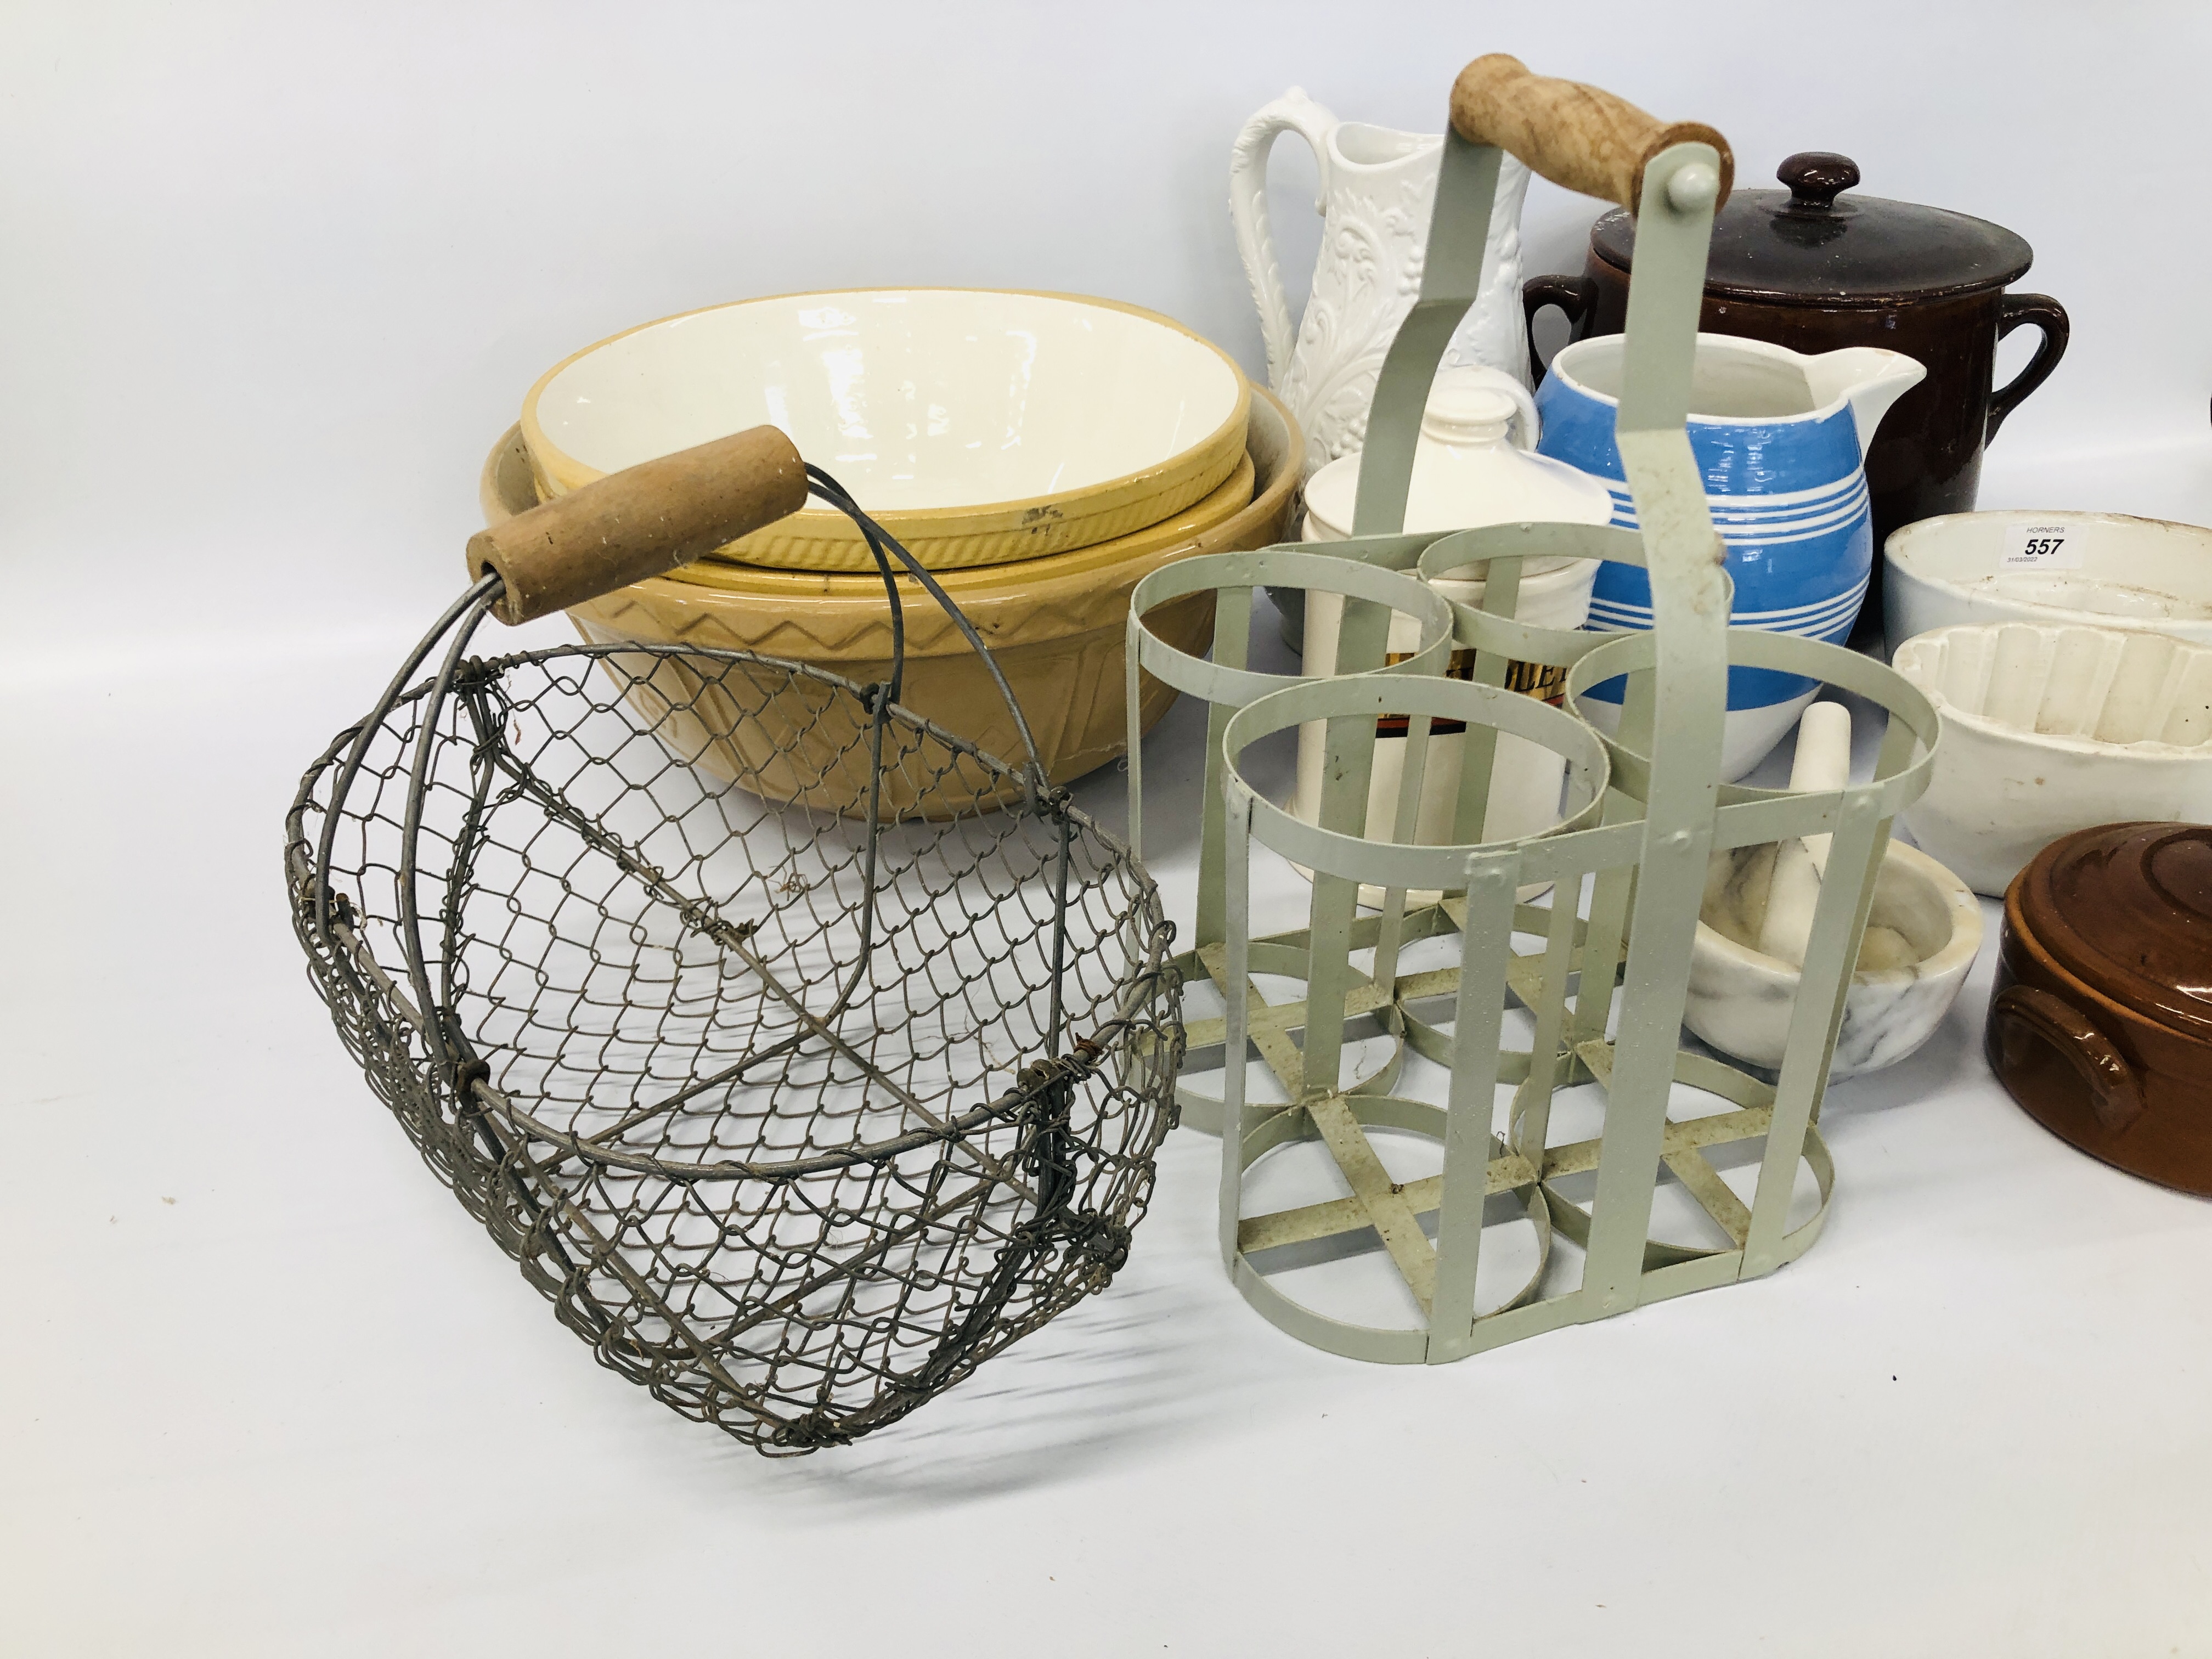 COLLECTION OF VINTAGE KITCHENALIA TO INCLUDE METAL MILK BOTTLE HOLDER, WIRE EGG BASKET, - Image 6 of 9